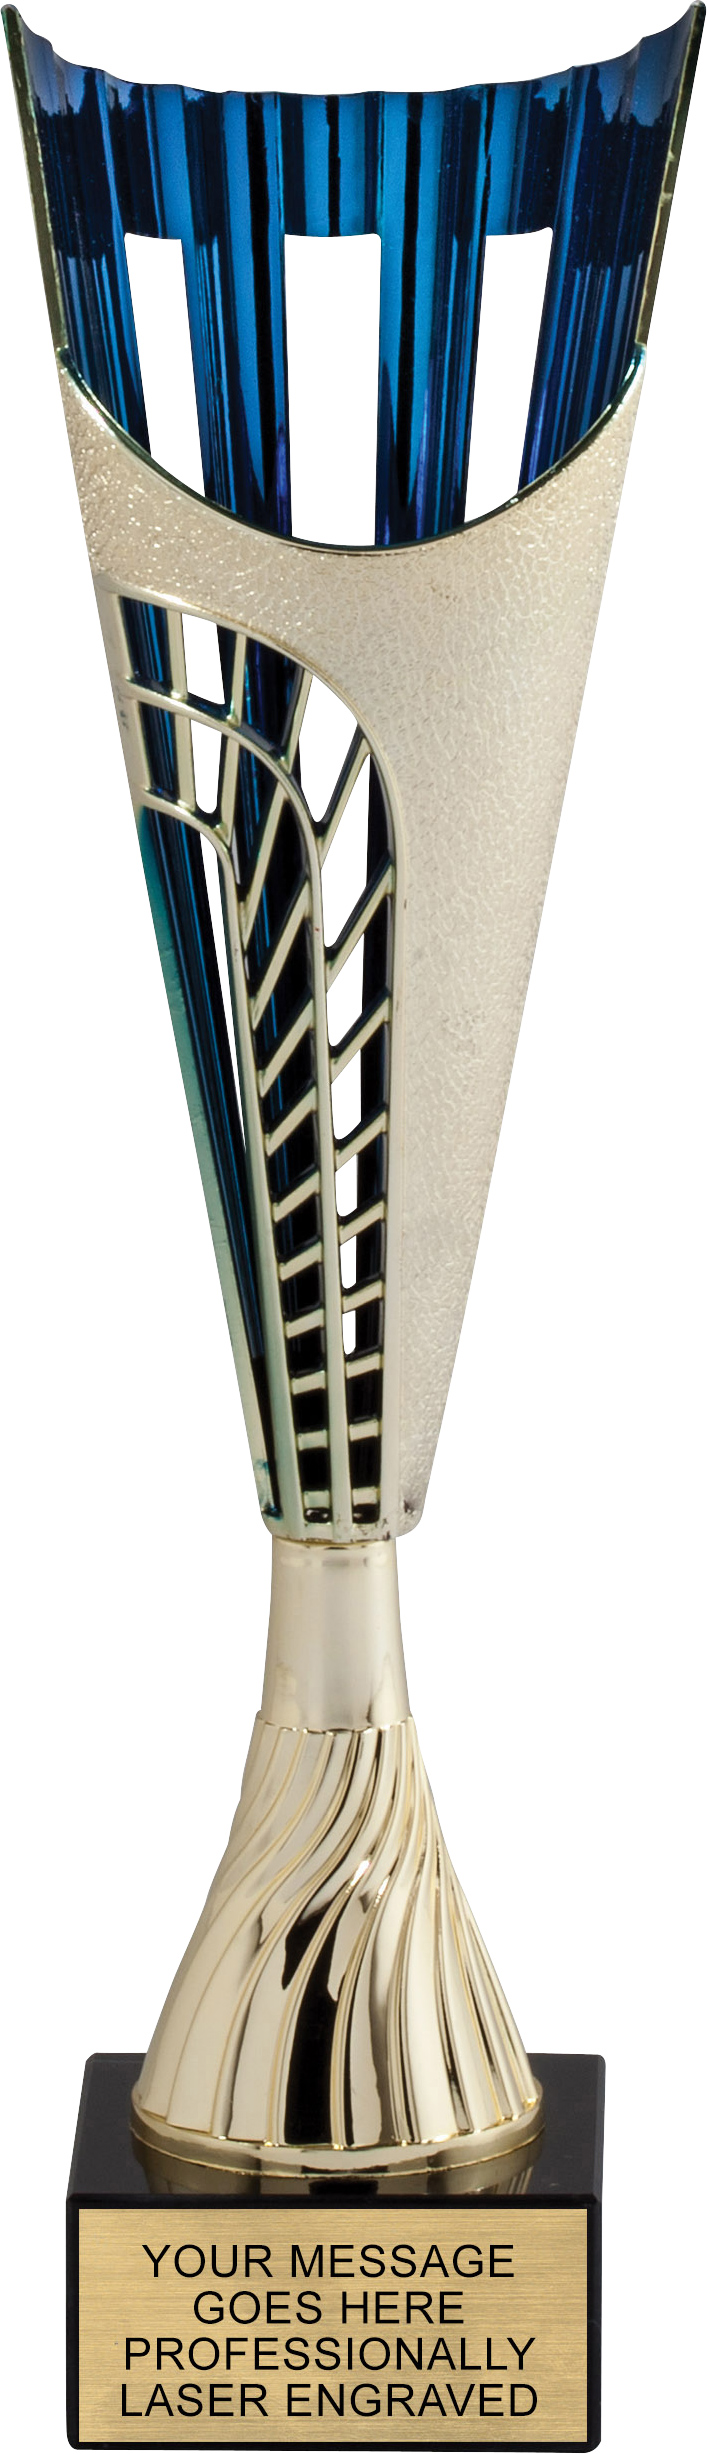 Trellis Cup with Blue Interior- 14.5 inch